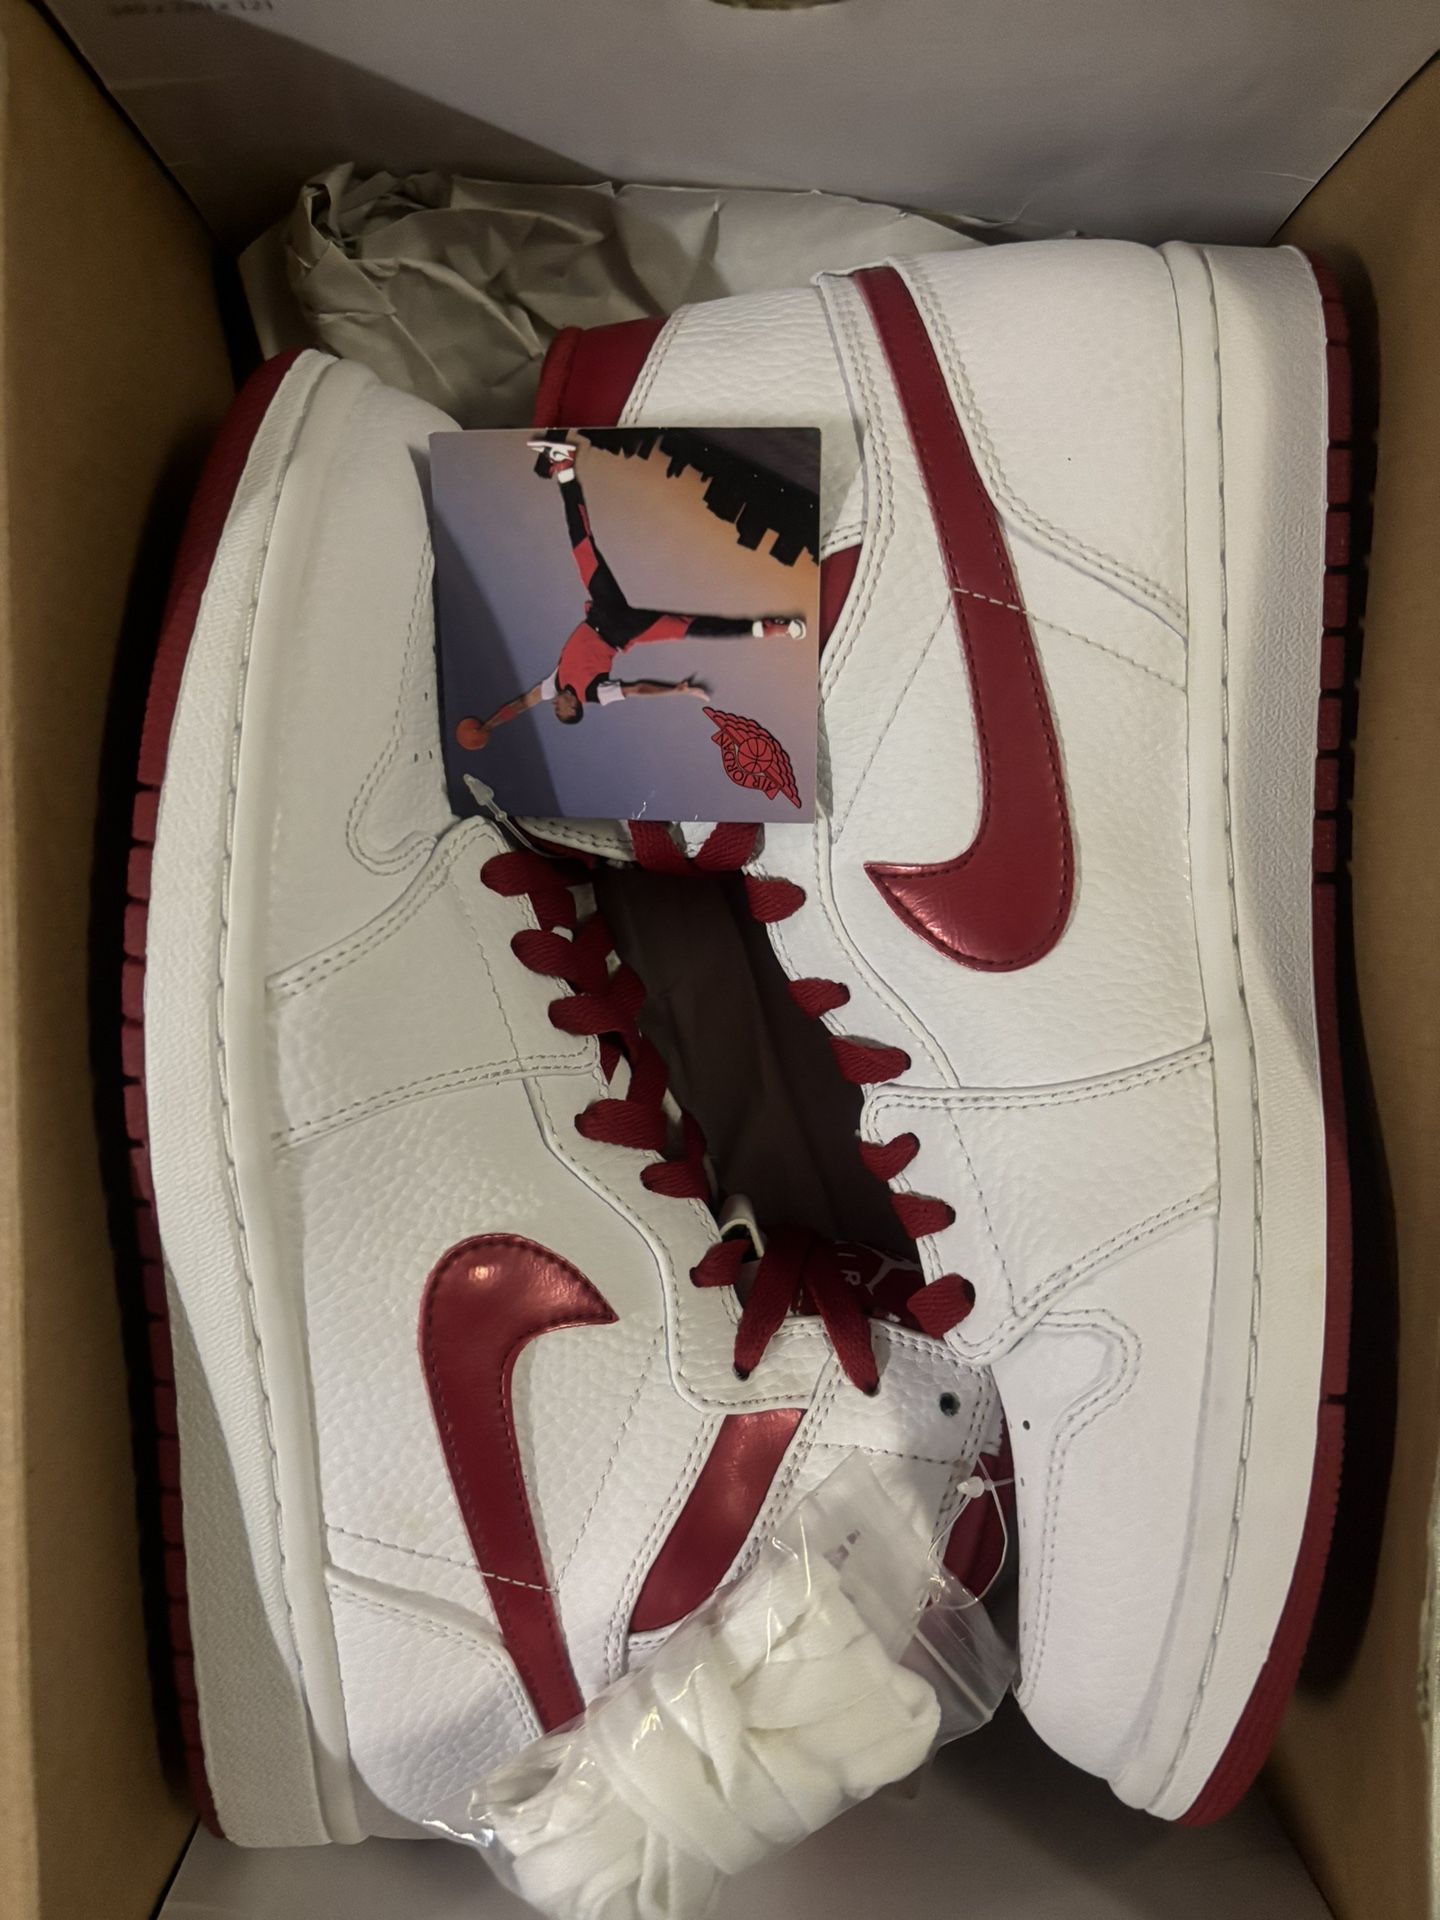  Nostalgic Heater in my opinion. Jordan 1 High Og. Metallic Varsity Red. 🔴⚪️ size(10.5M). DS(New). Now available! $225. Cash. Trades always welcome. 